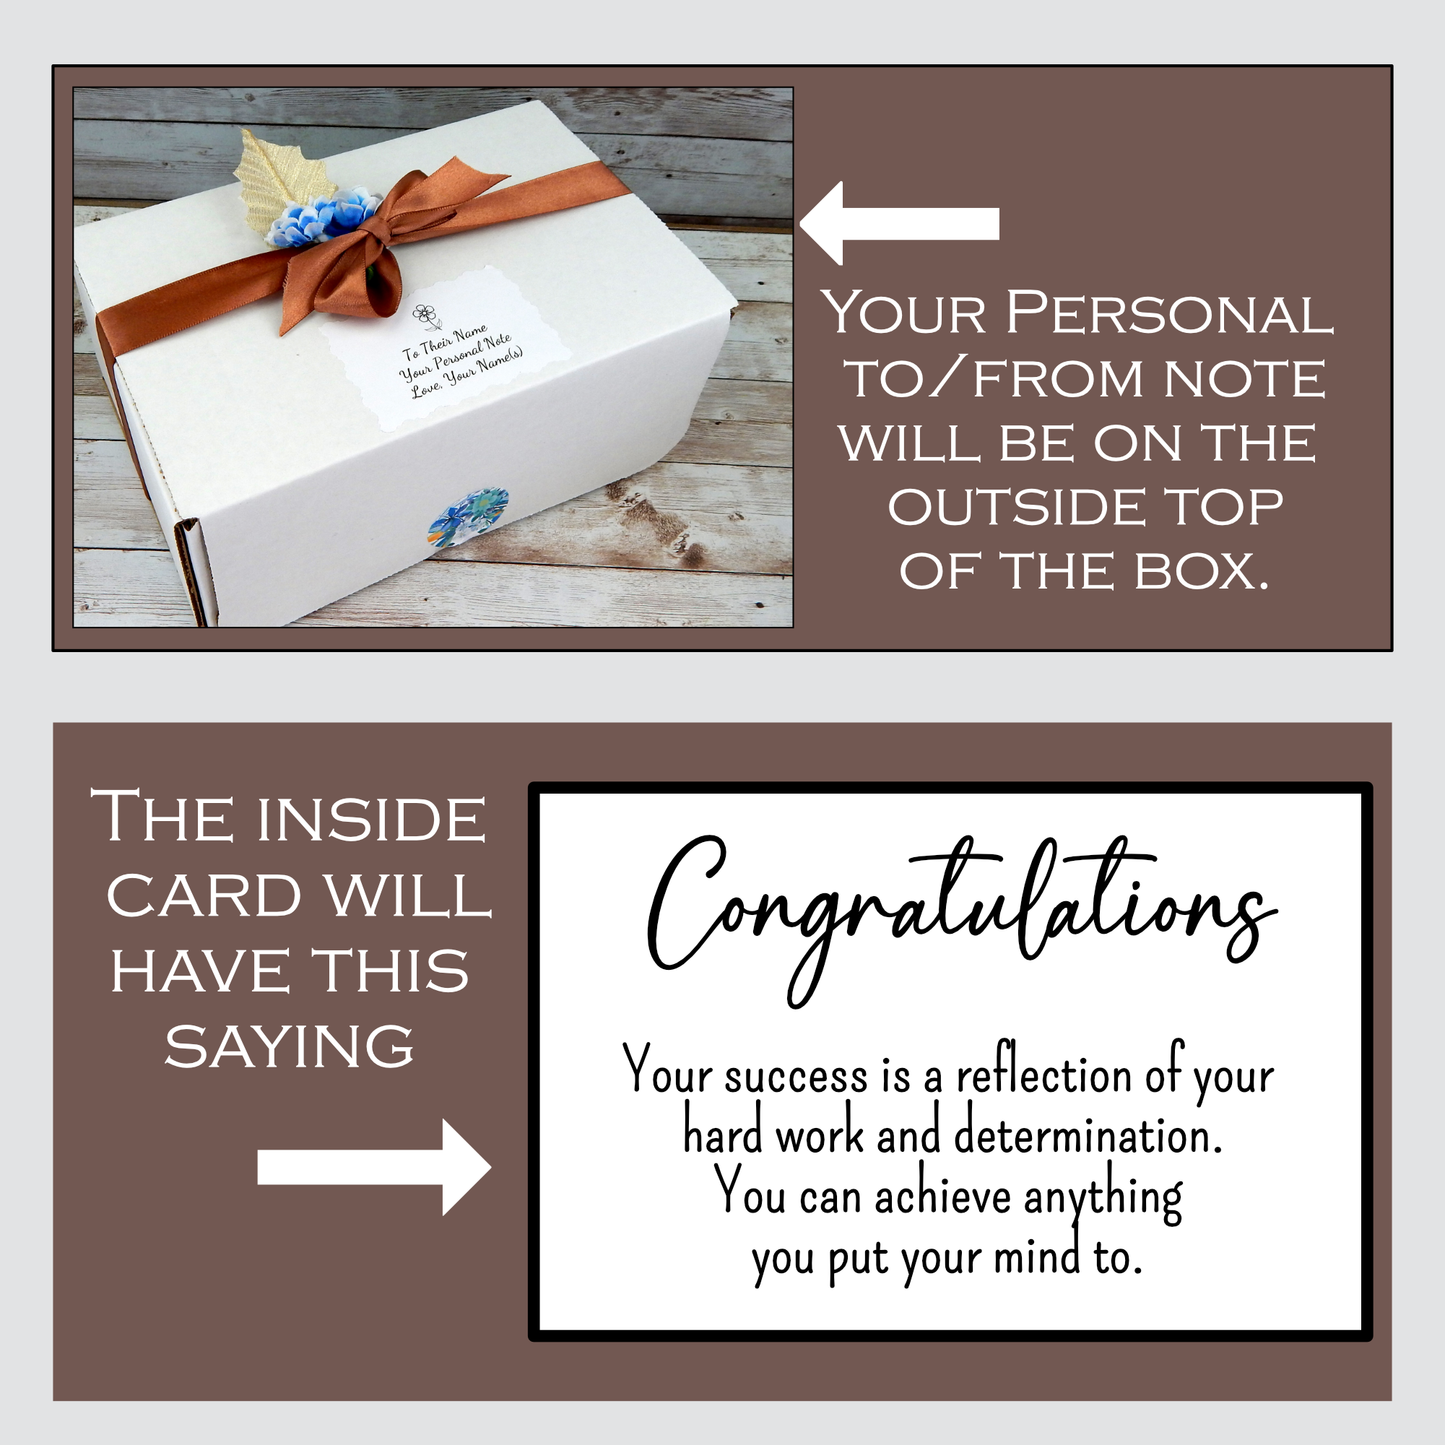 Personalized Congrats Gift for Graduation, New Job or Achievement